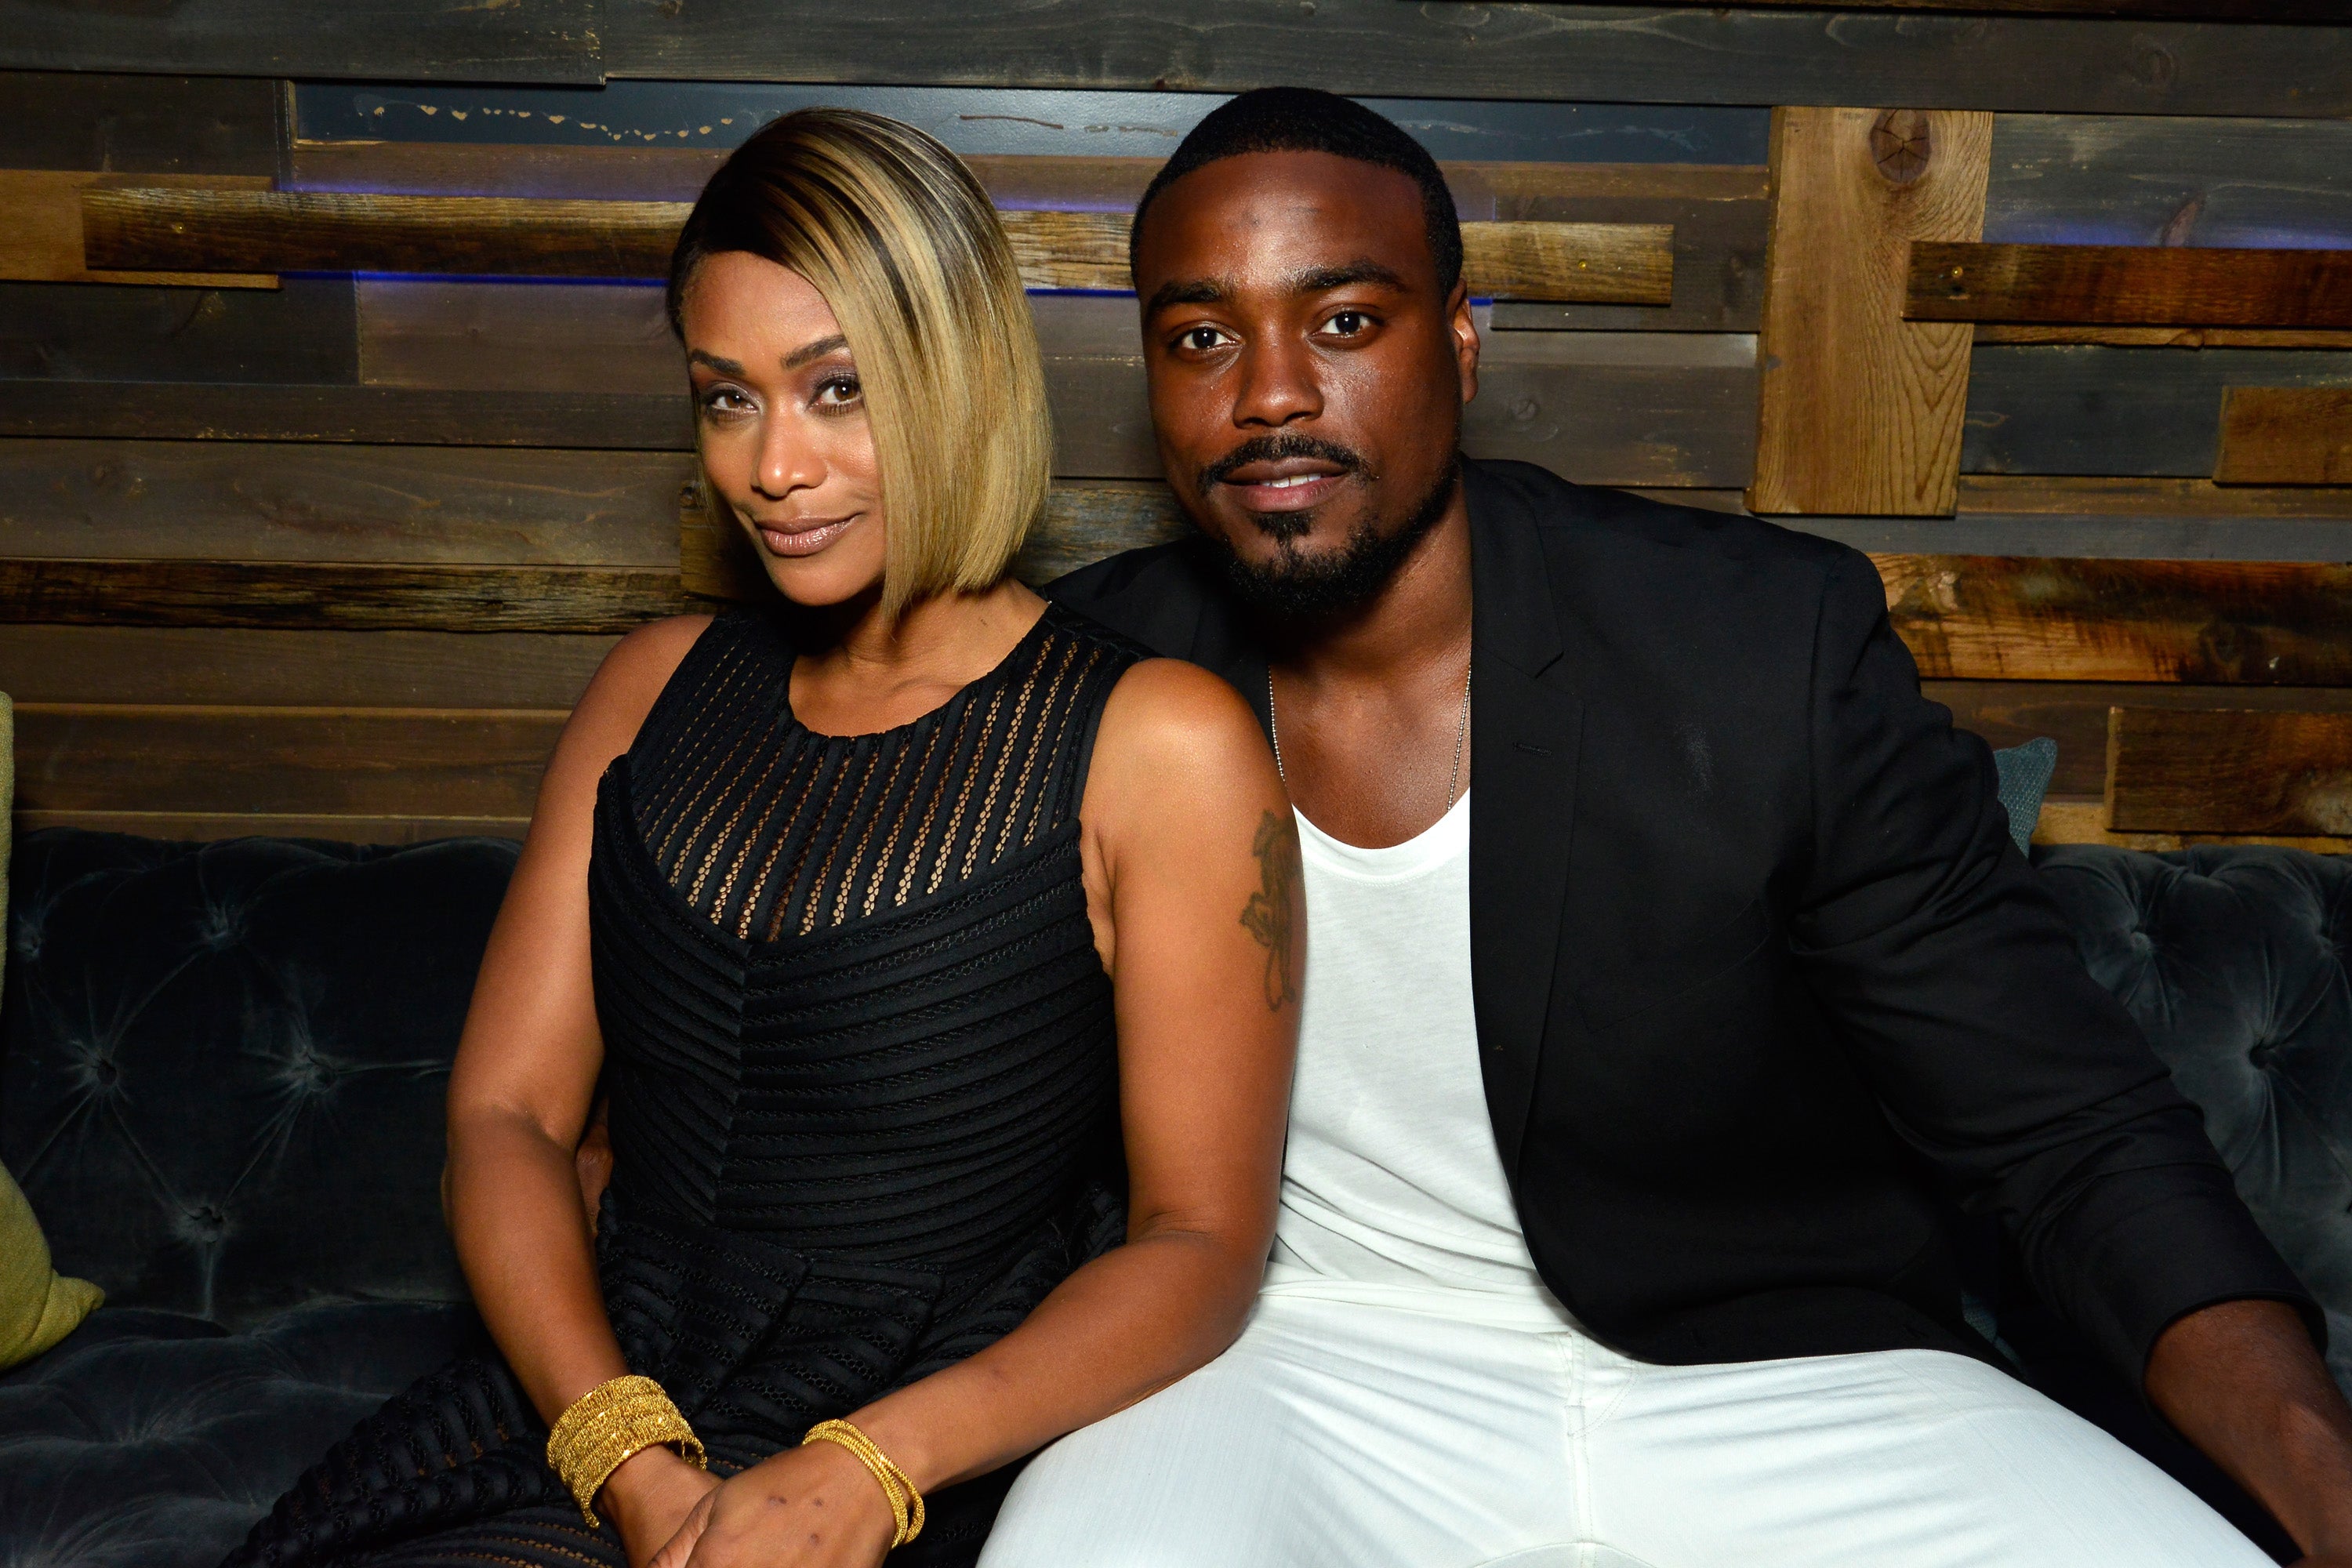 Tami Roman and Reggie Youngblood Reportedly Married Last Year